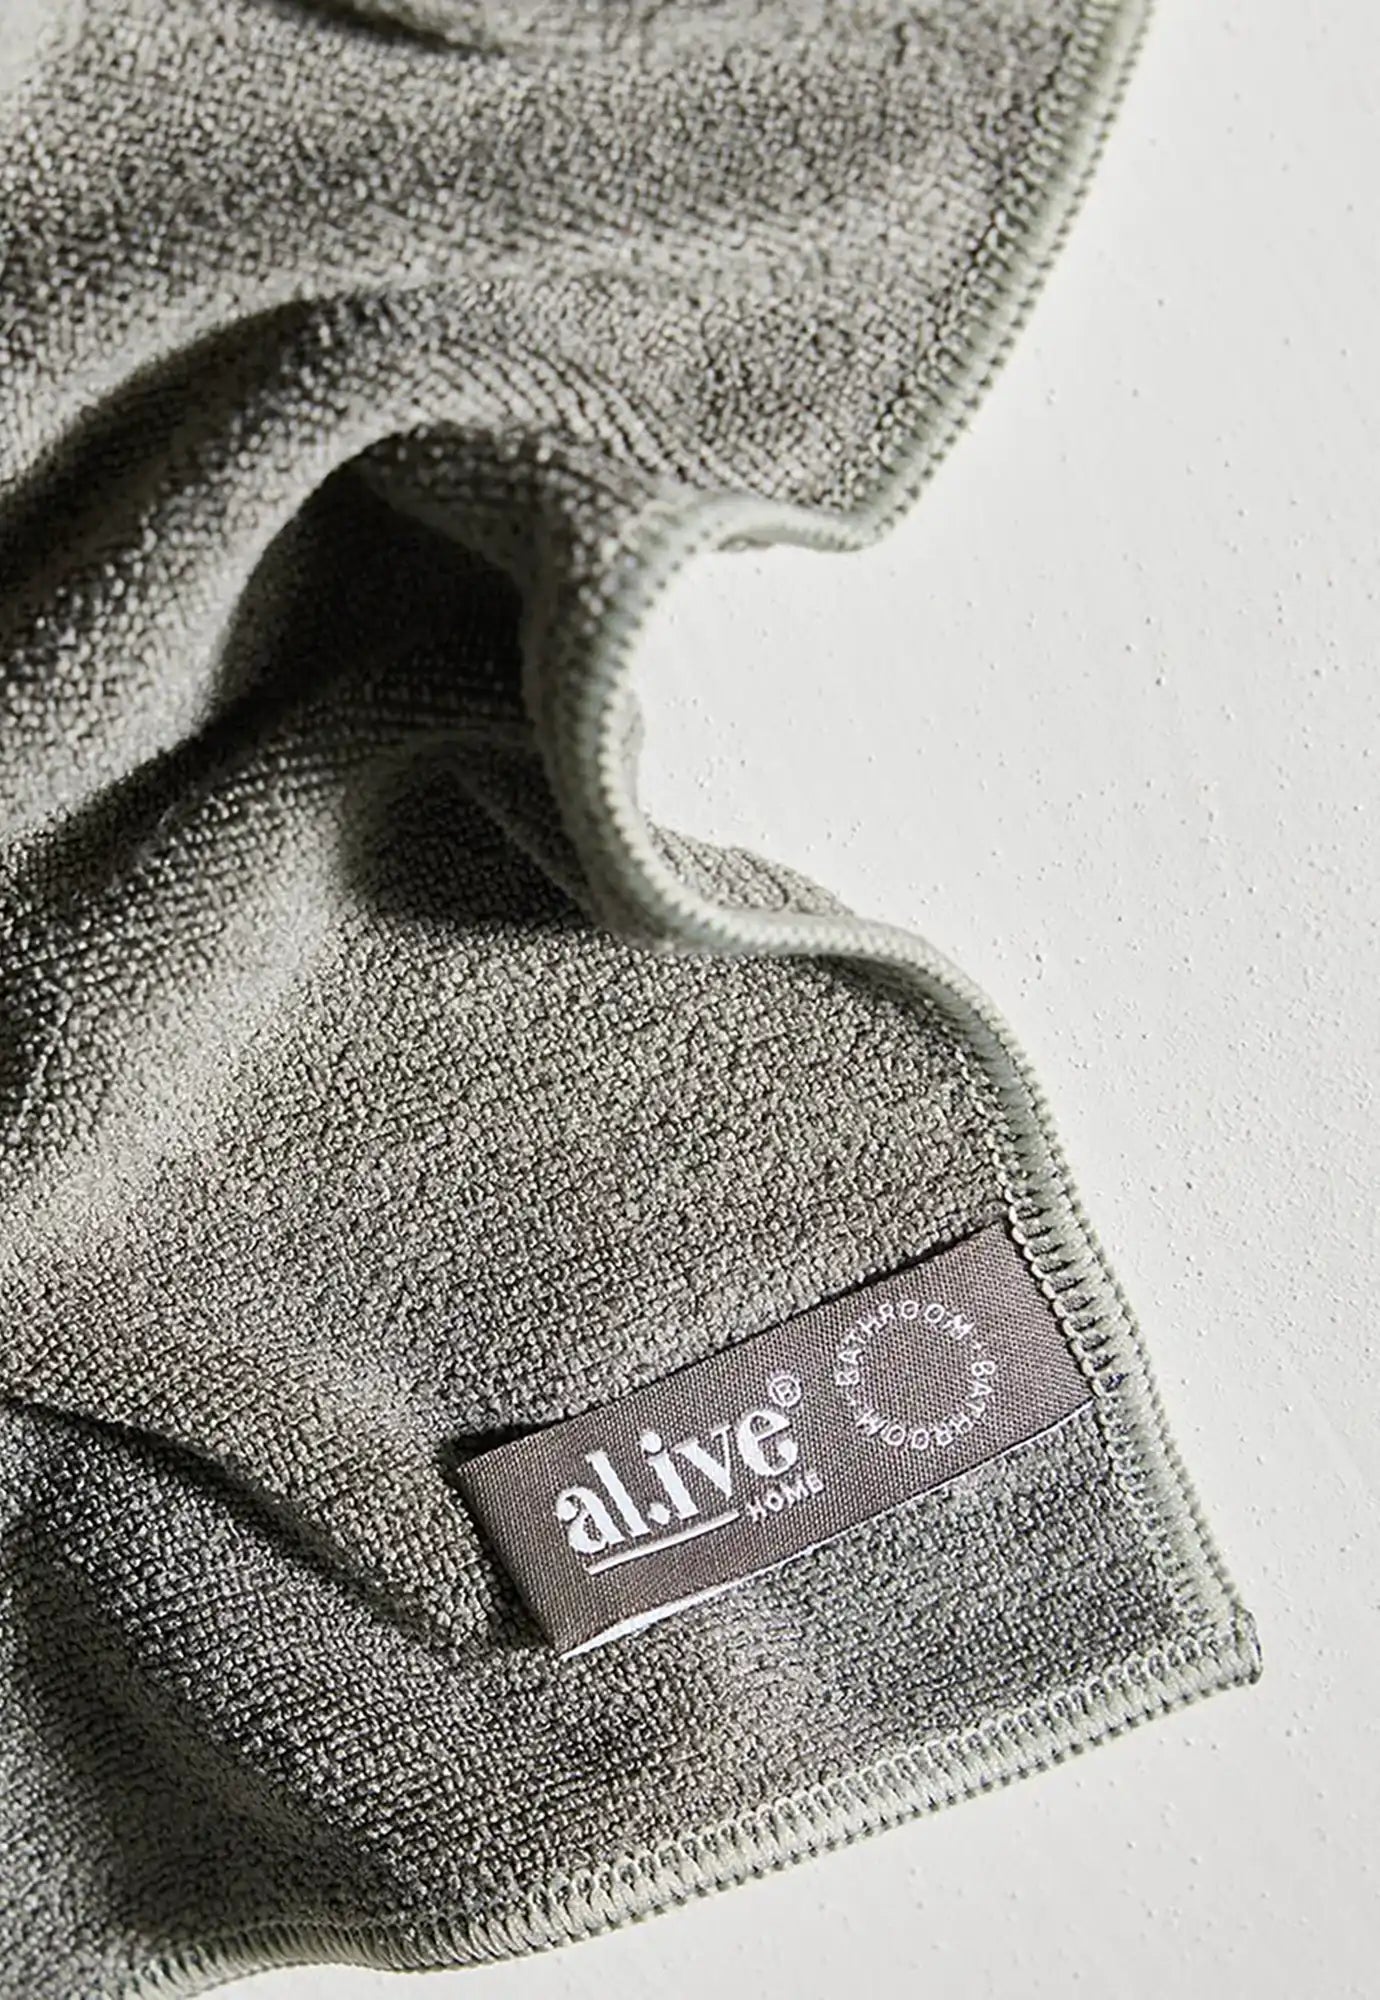 al.ive - home cleaning microfibre cloths